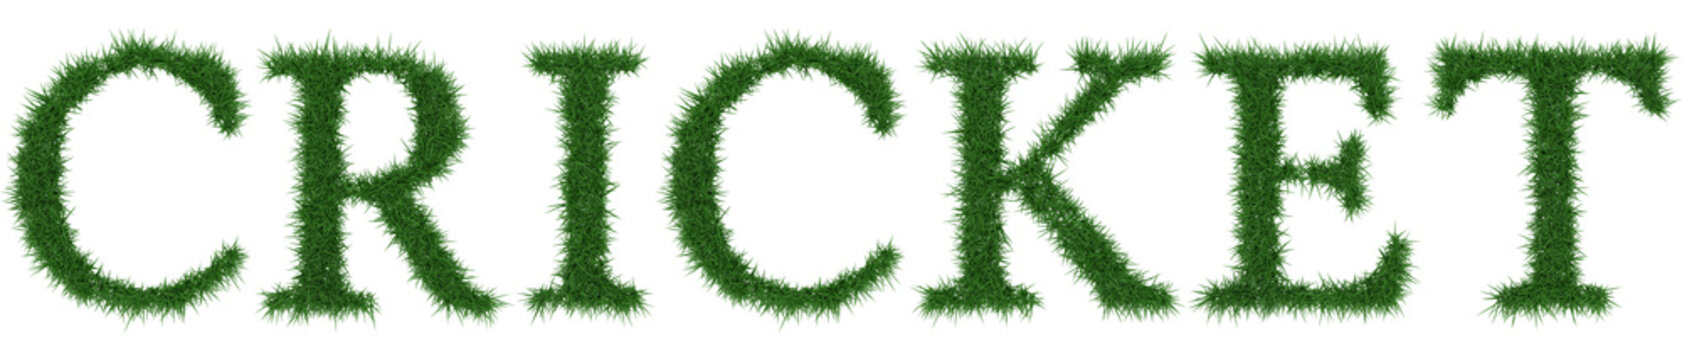 Cricket - 3D rendering fresh Grass letters isolated on whhite background.